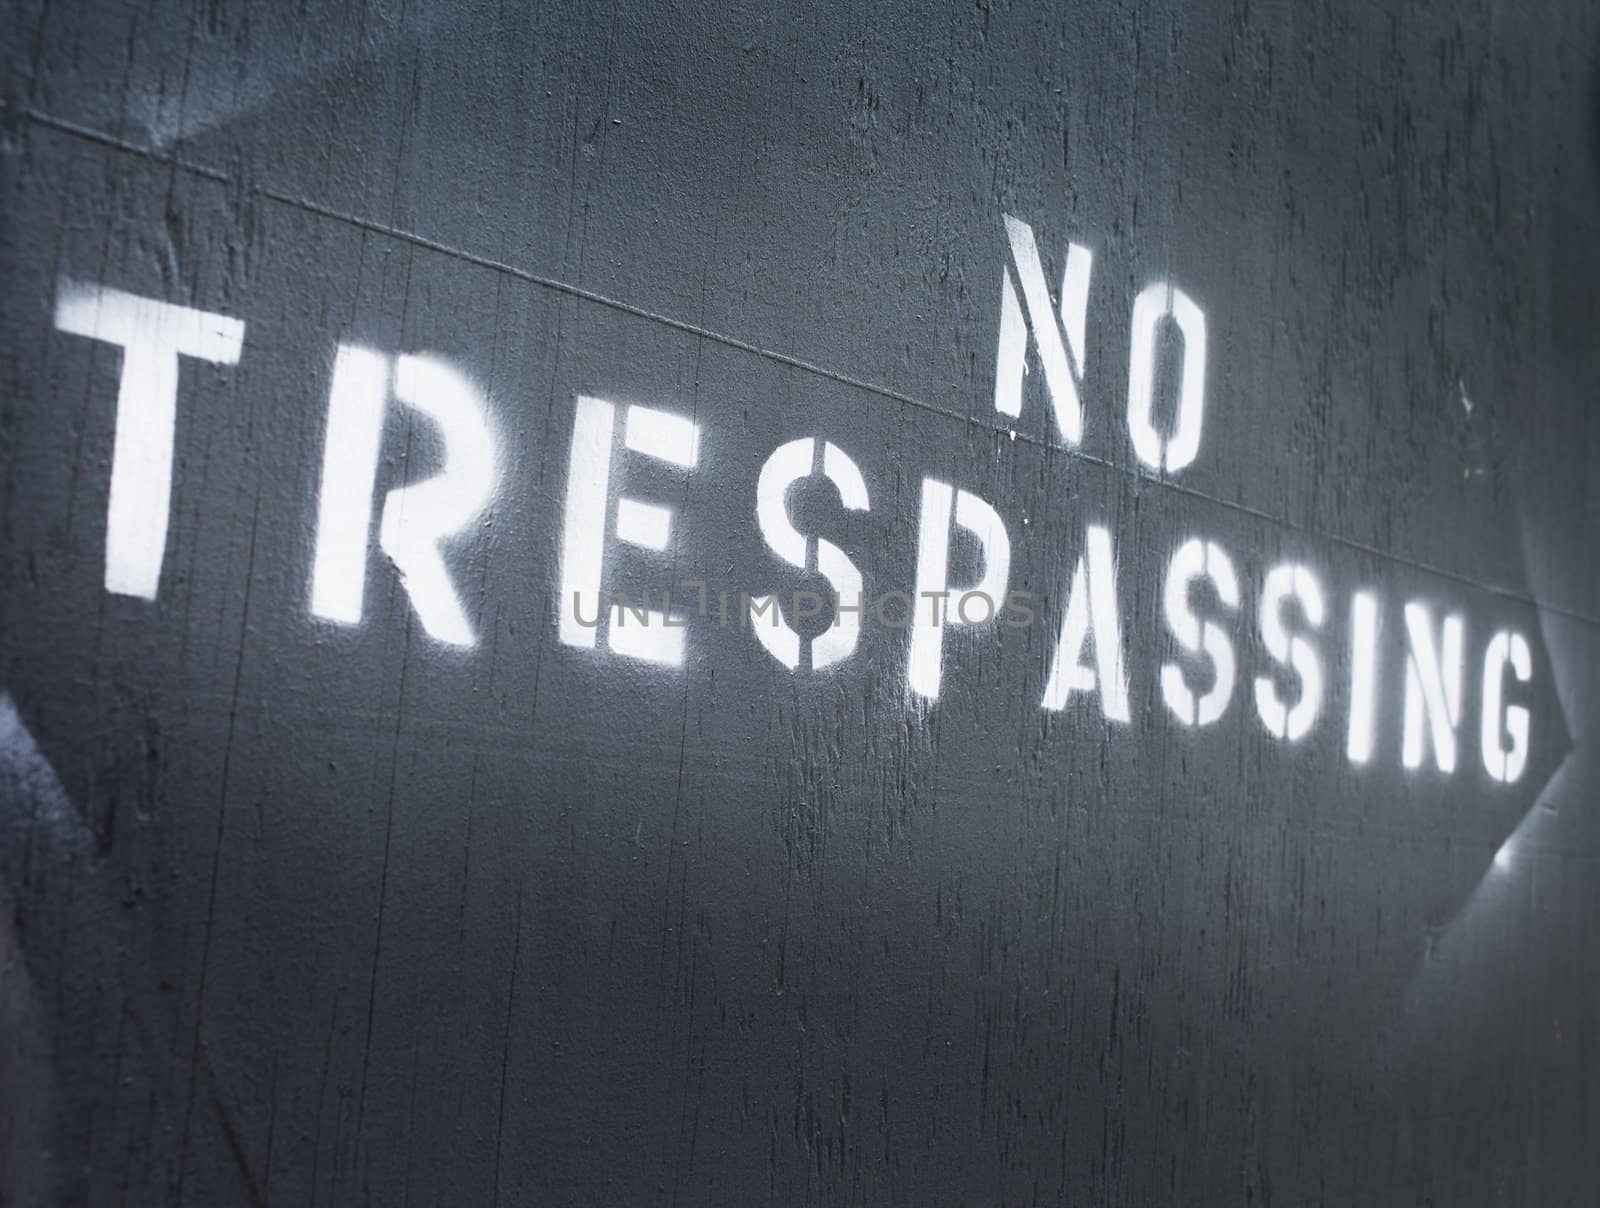 Text "No Trespassing" sprayed on a wall.